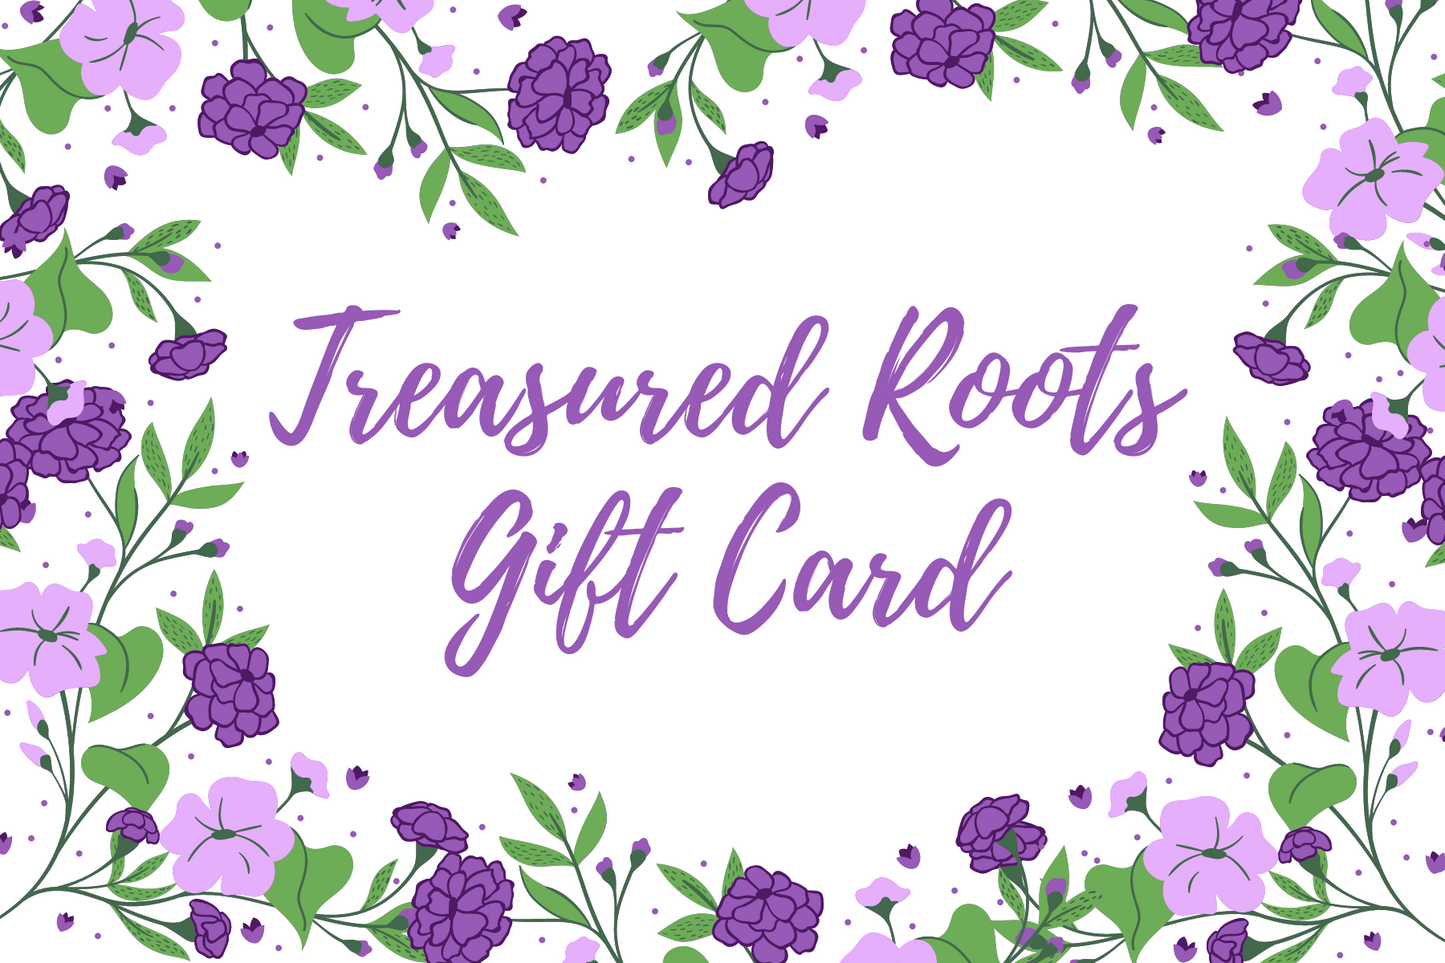 Treasured Roots Physical Gift Card